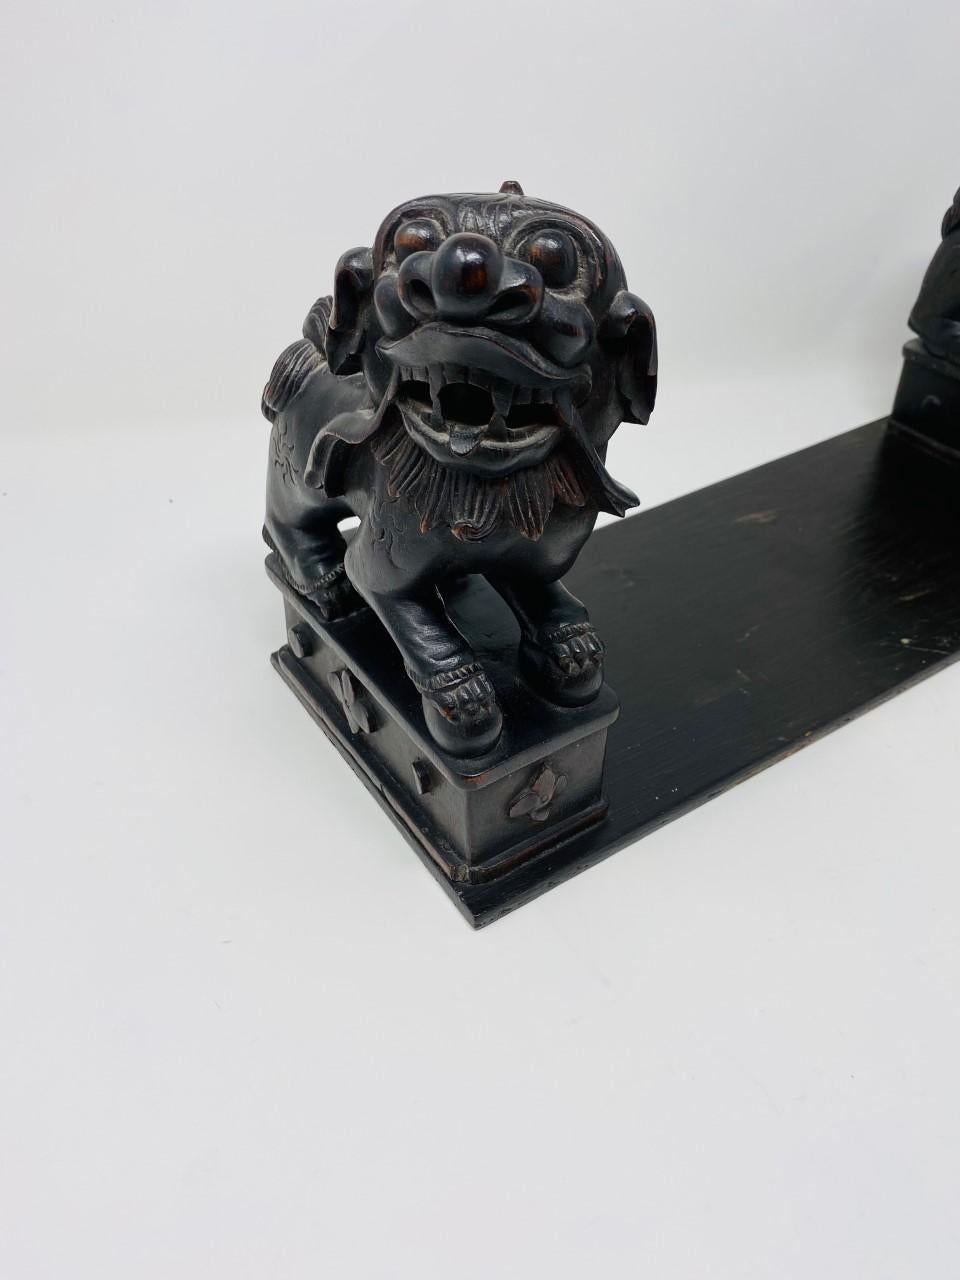 Vintage set of foo dogs mounted on a wood tray. These beautiful carved foo dogs rest on a conjoined tray that is ready for favorite titles or it can act as a decorative tray. The figures and finely carved and beautifully aged. This vintage set